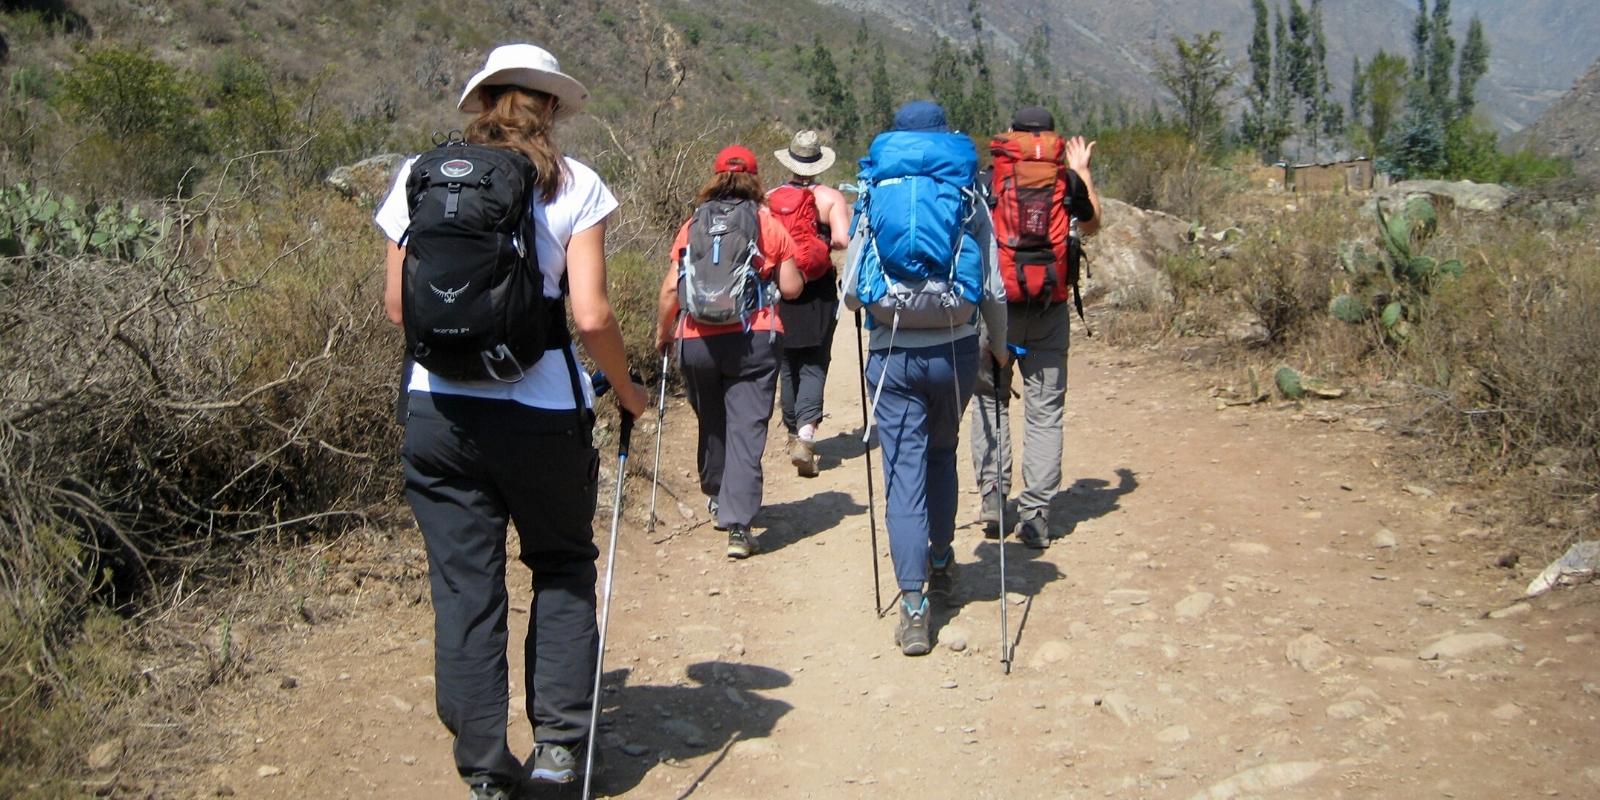 WHAT TO PACK FOR THE INCA TRAIL